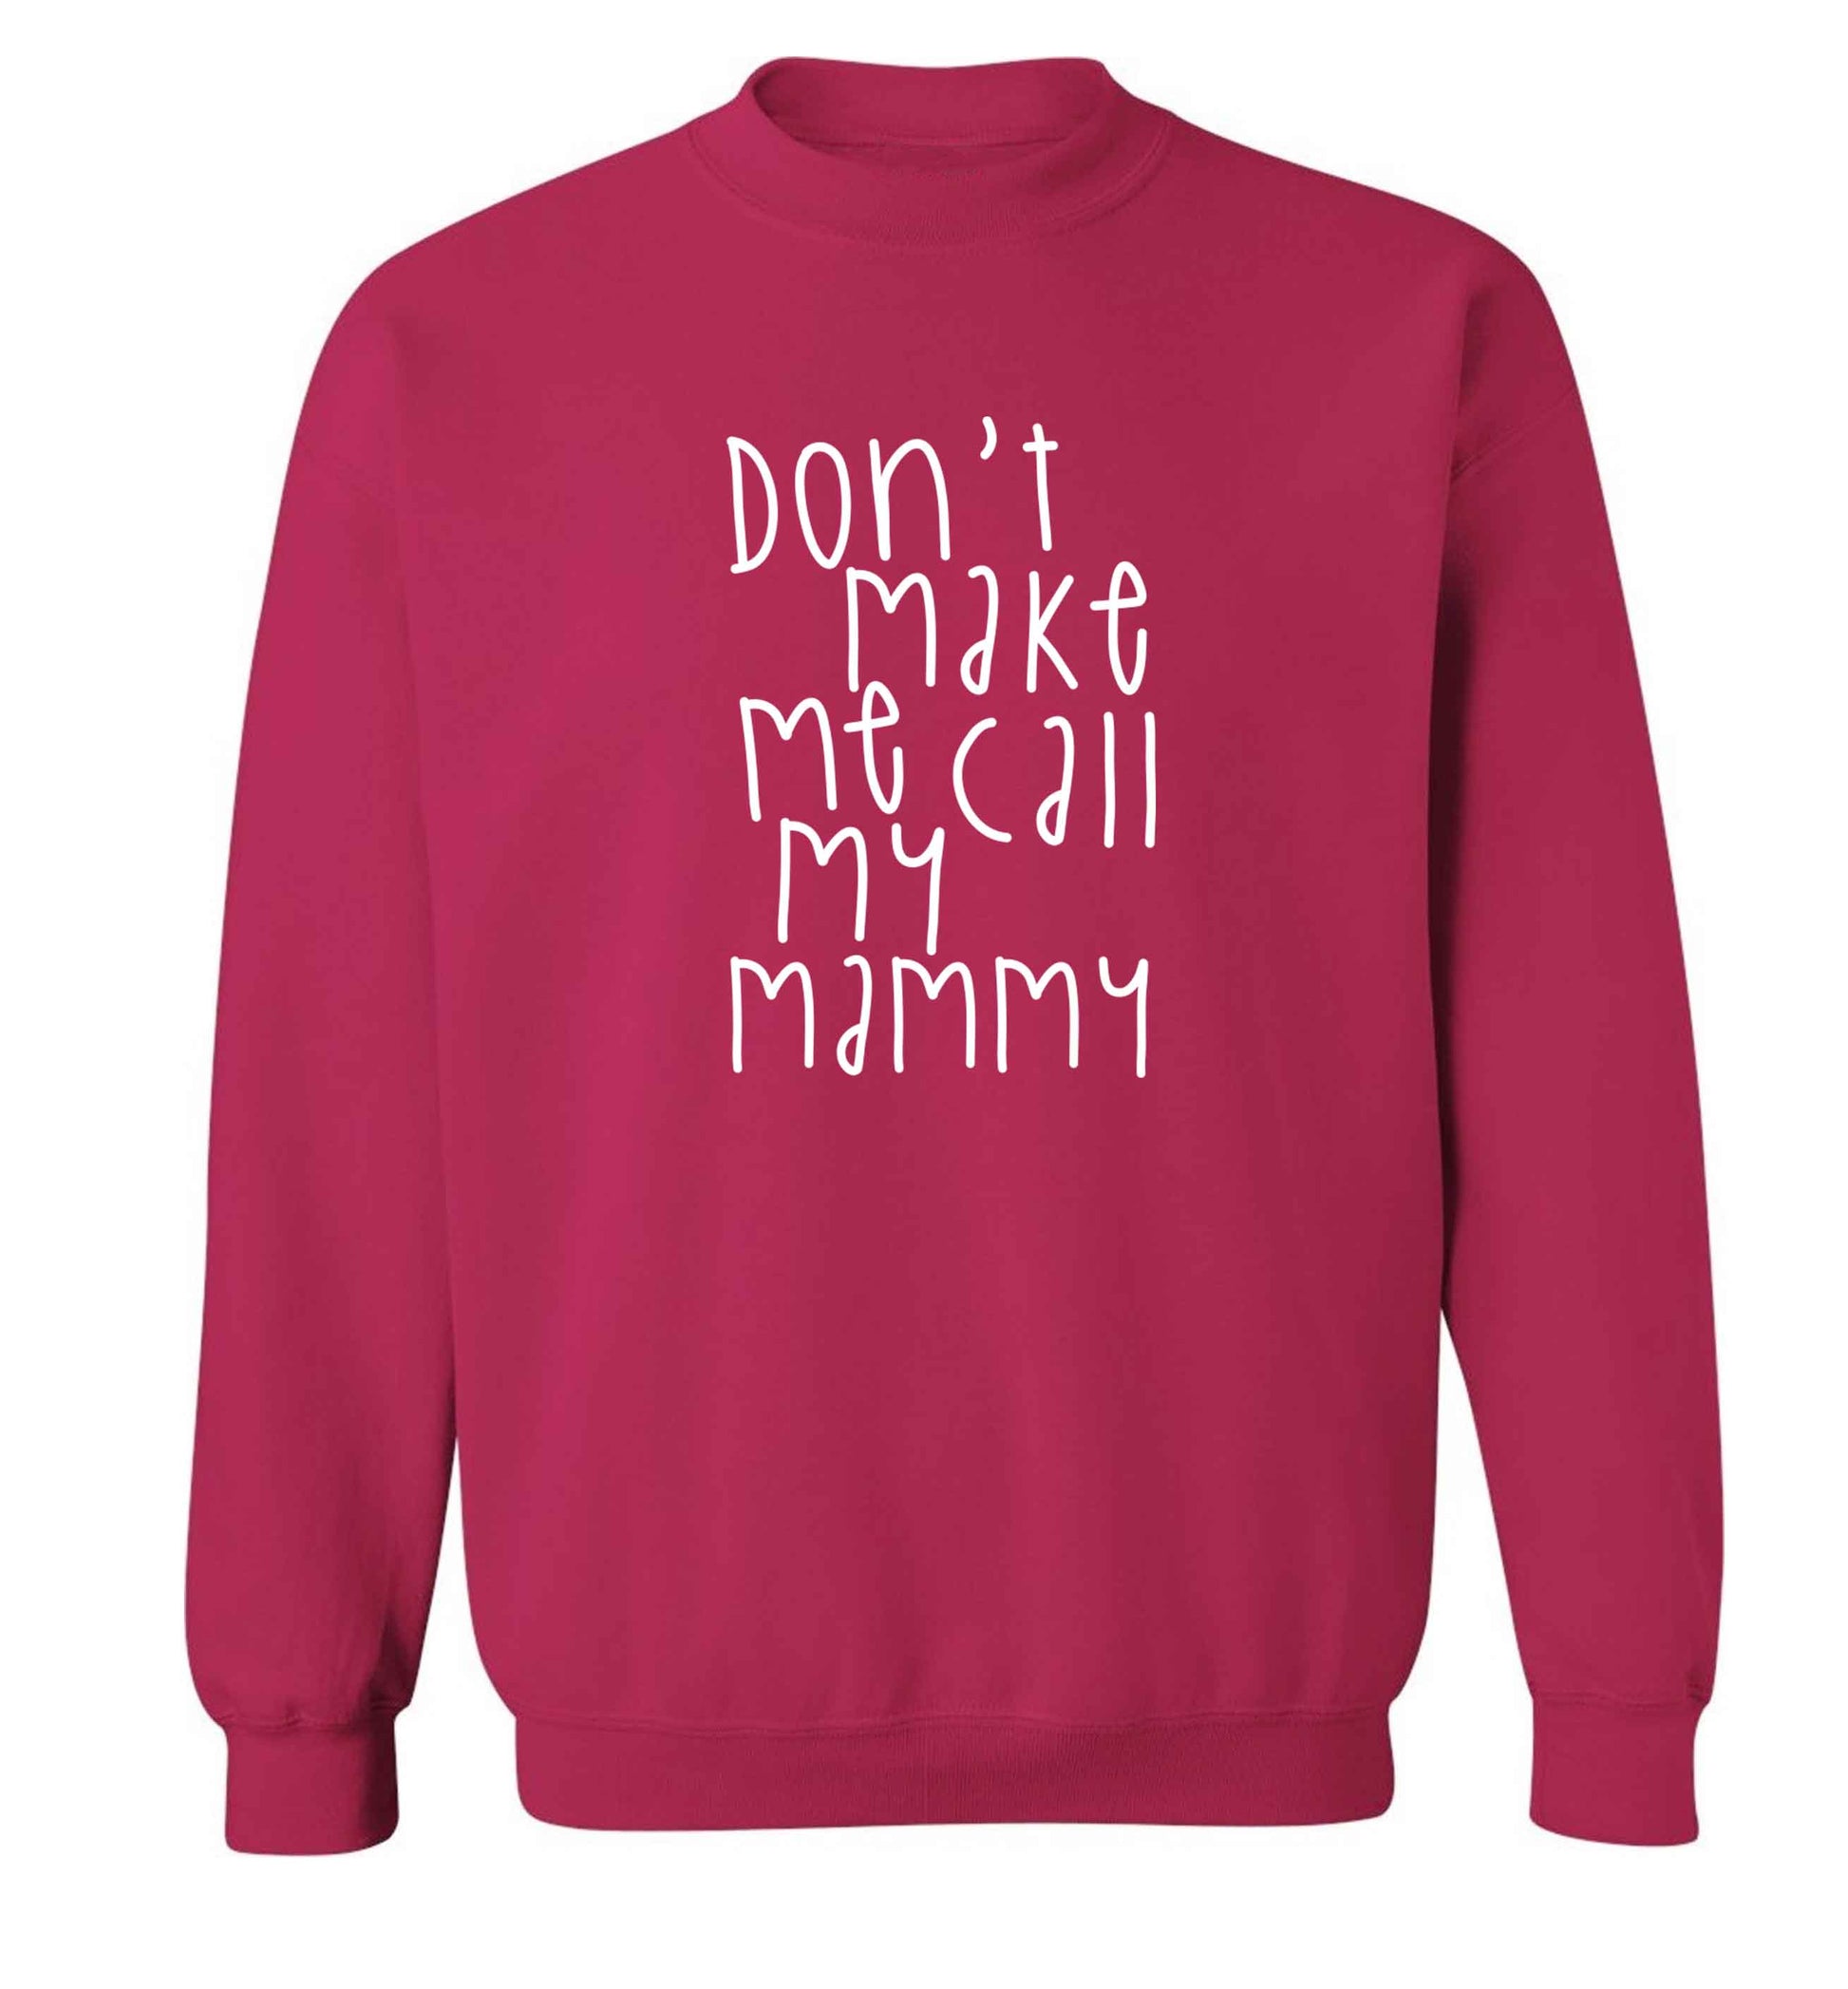 Don't make me call my mammy adult's unisex pink sweater 2XL